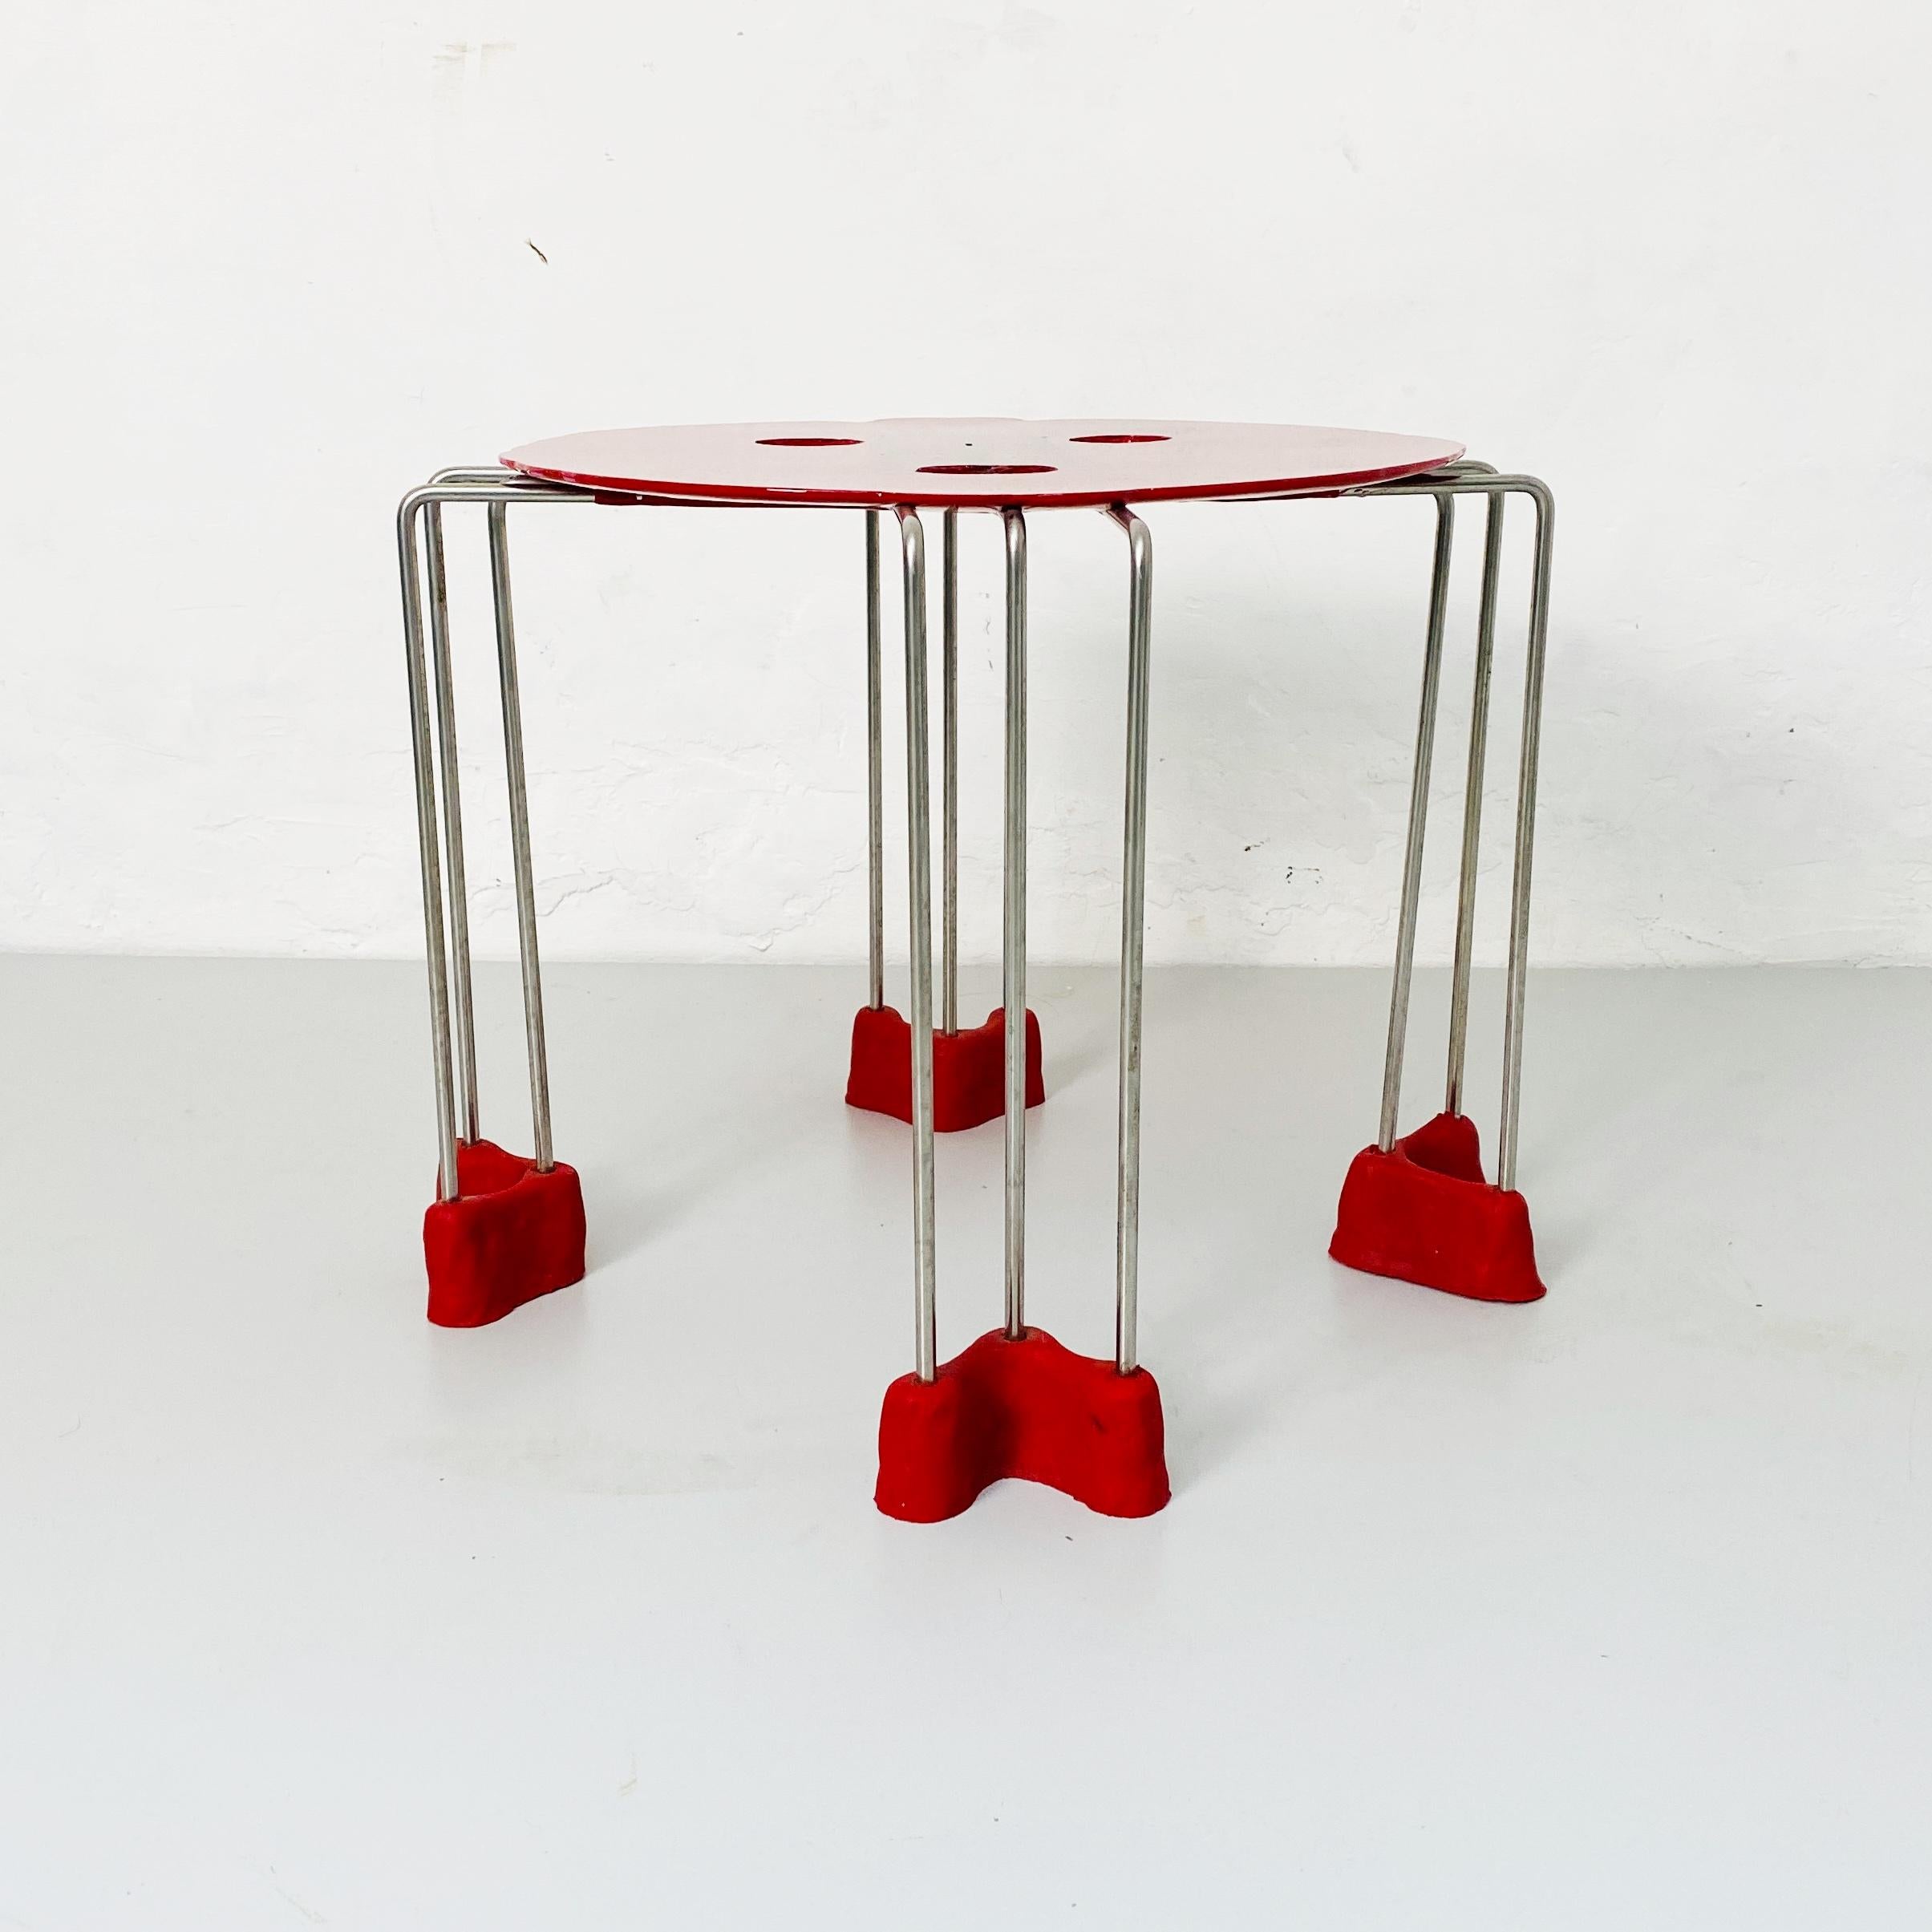 Metal Italian Modern Triple Play Resin Stool by Gaetano Pesce for Fish Design, 2000s For Sale